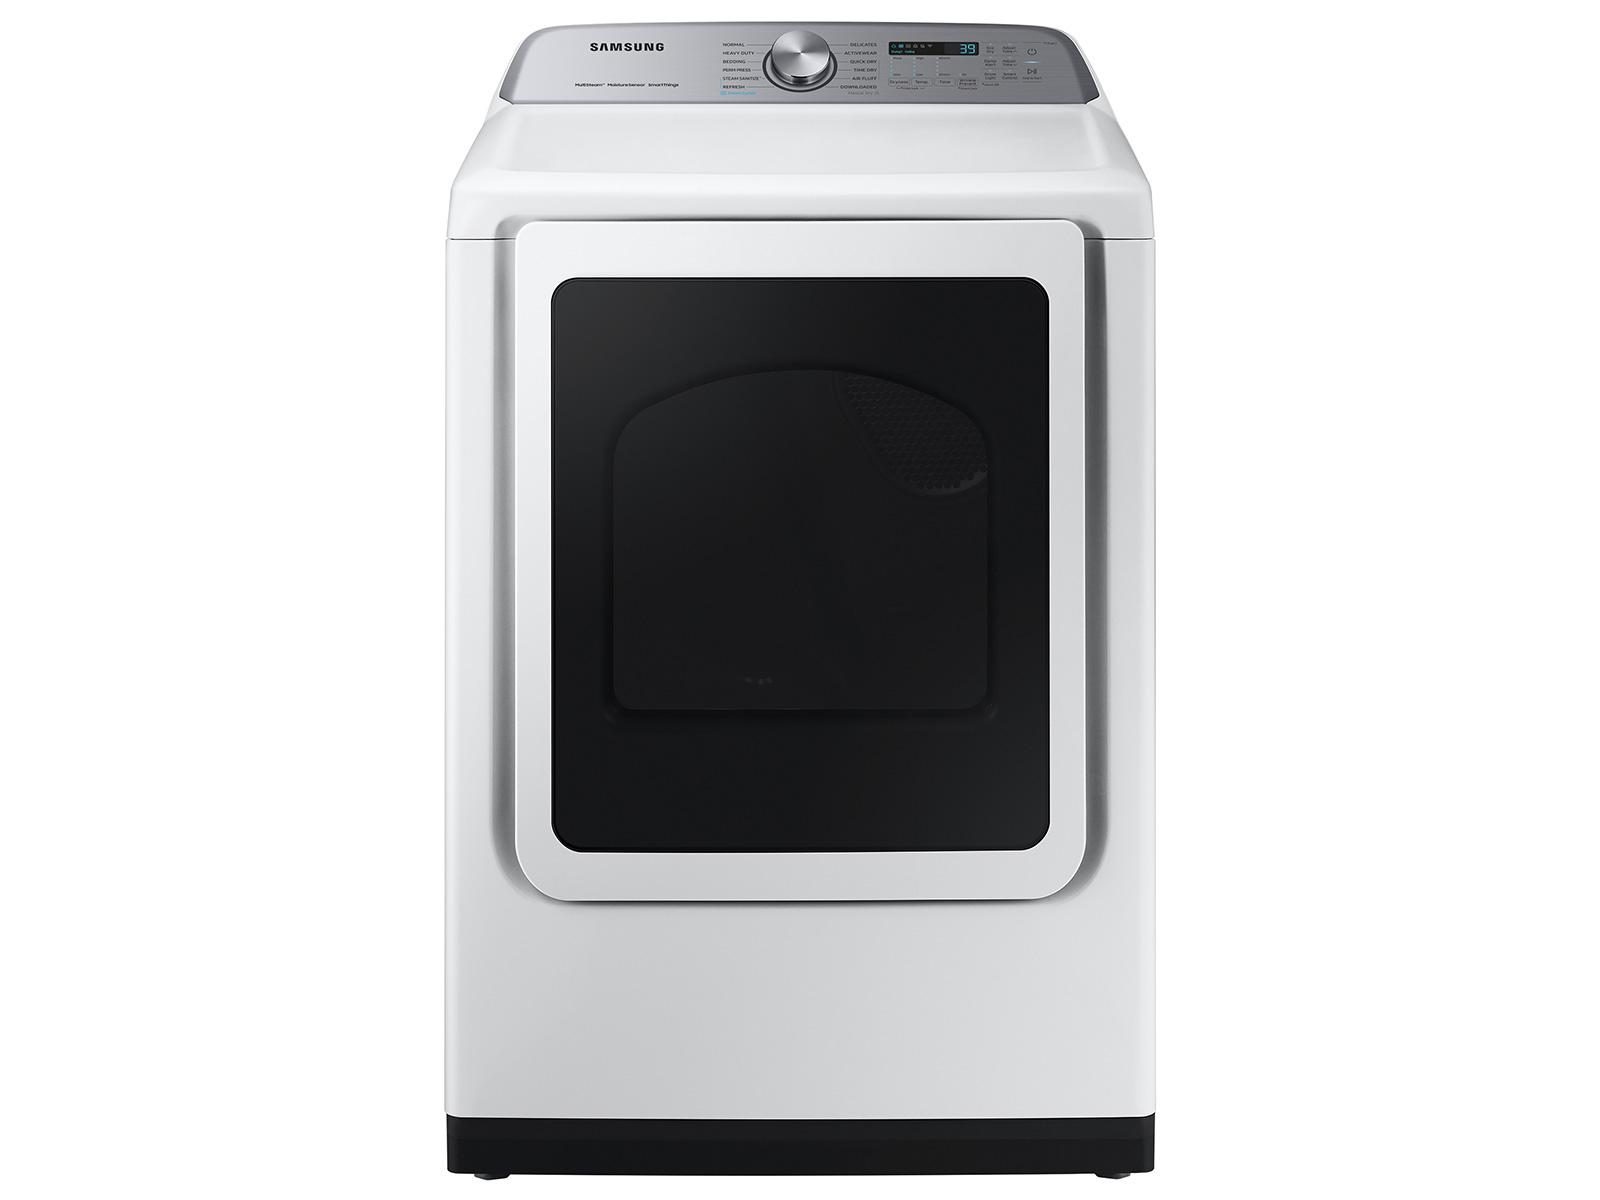 Samsung 7.4 cu. ft. Smart Gas Dryer with Steam Sanitize+ in White(DVG52A5500W/A3)